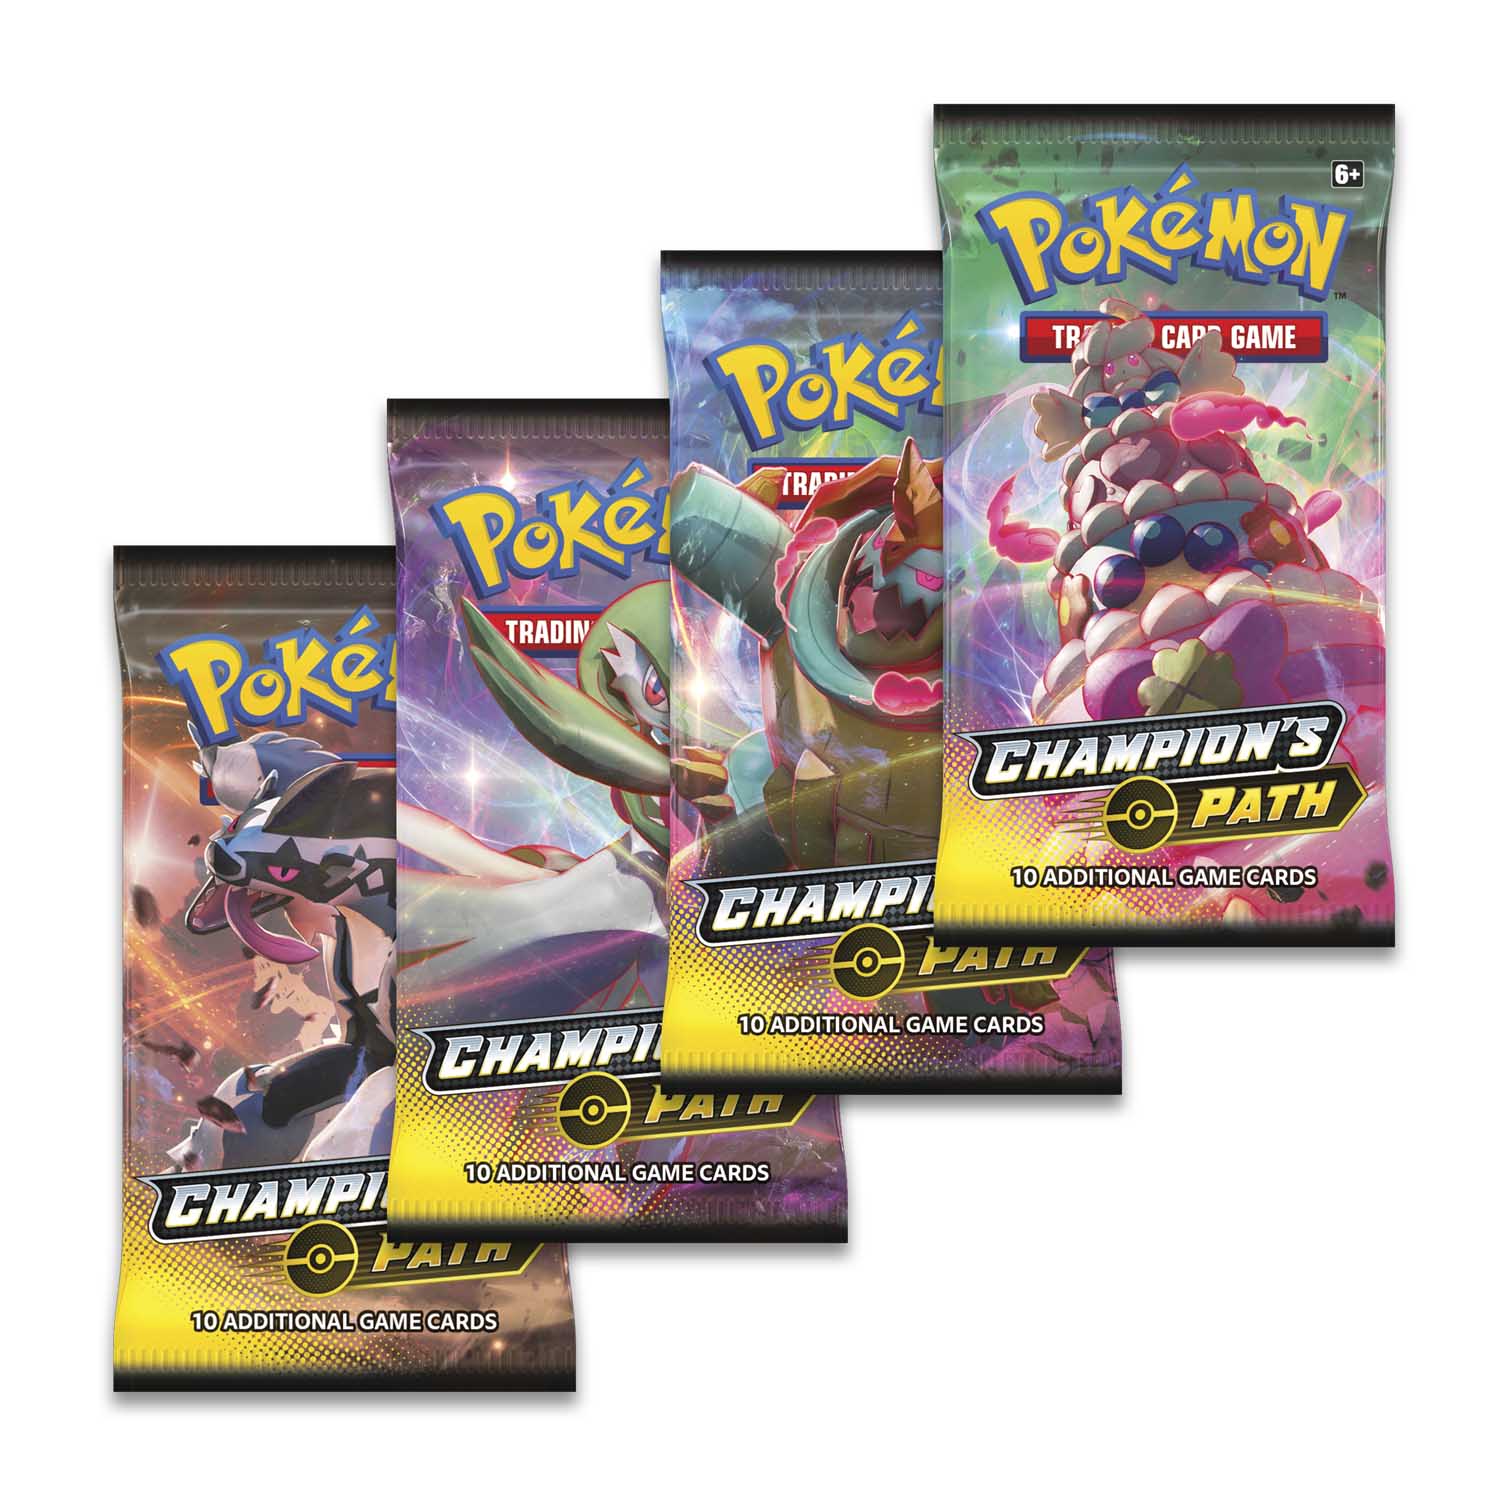 Pokemon TCG Champion's Path Dubwool V Collection Box 4 Booster Packs Live 